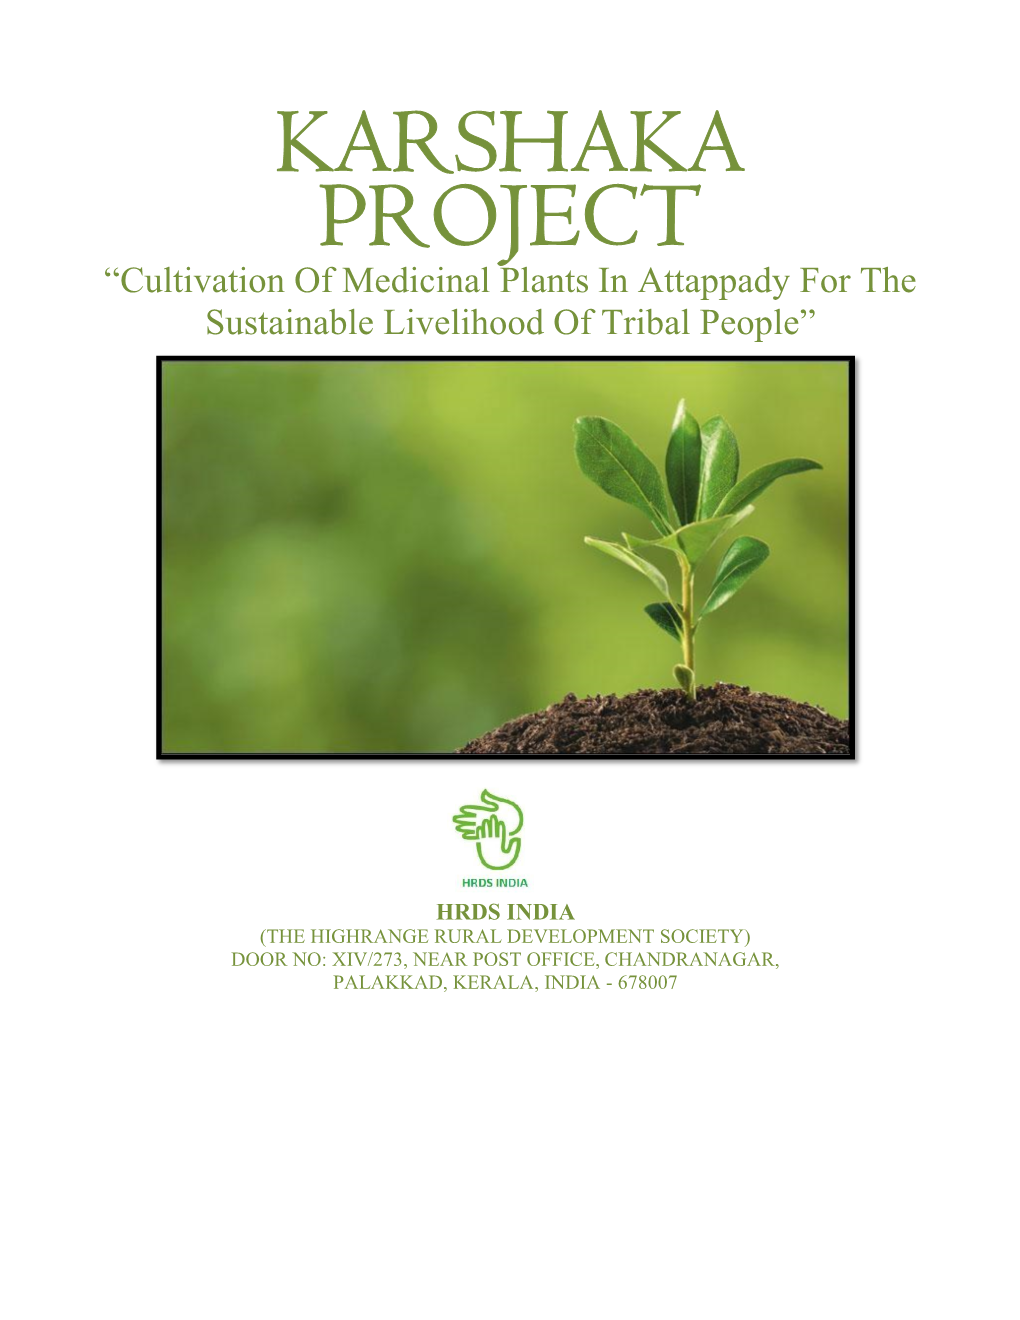 KARSHAKA PROJECT “Cultivation of Medicinal Plants in Attappady for the Sustainable Livelihood of Tribal People”